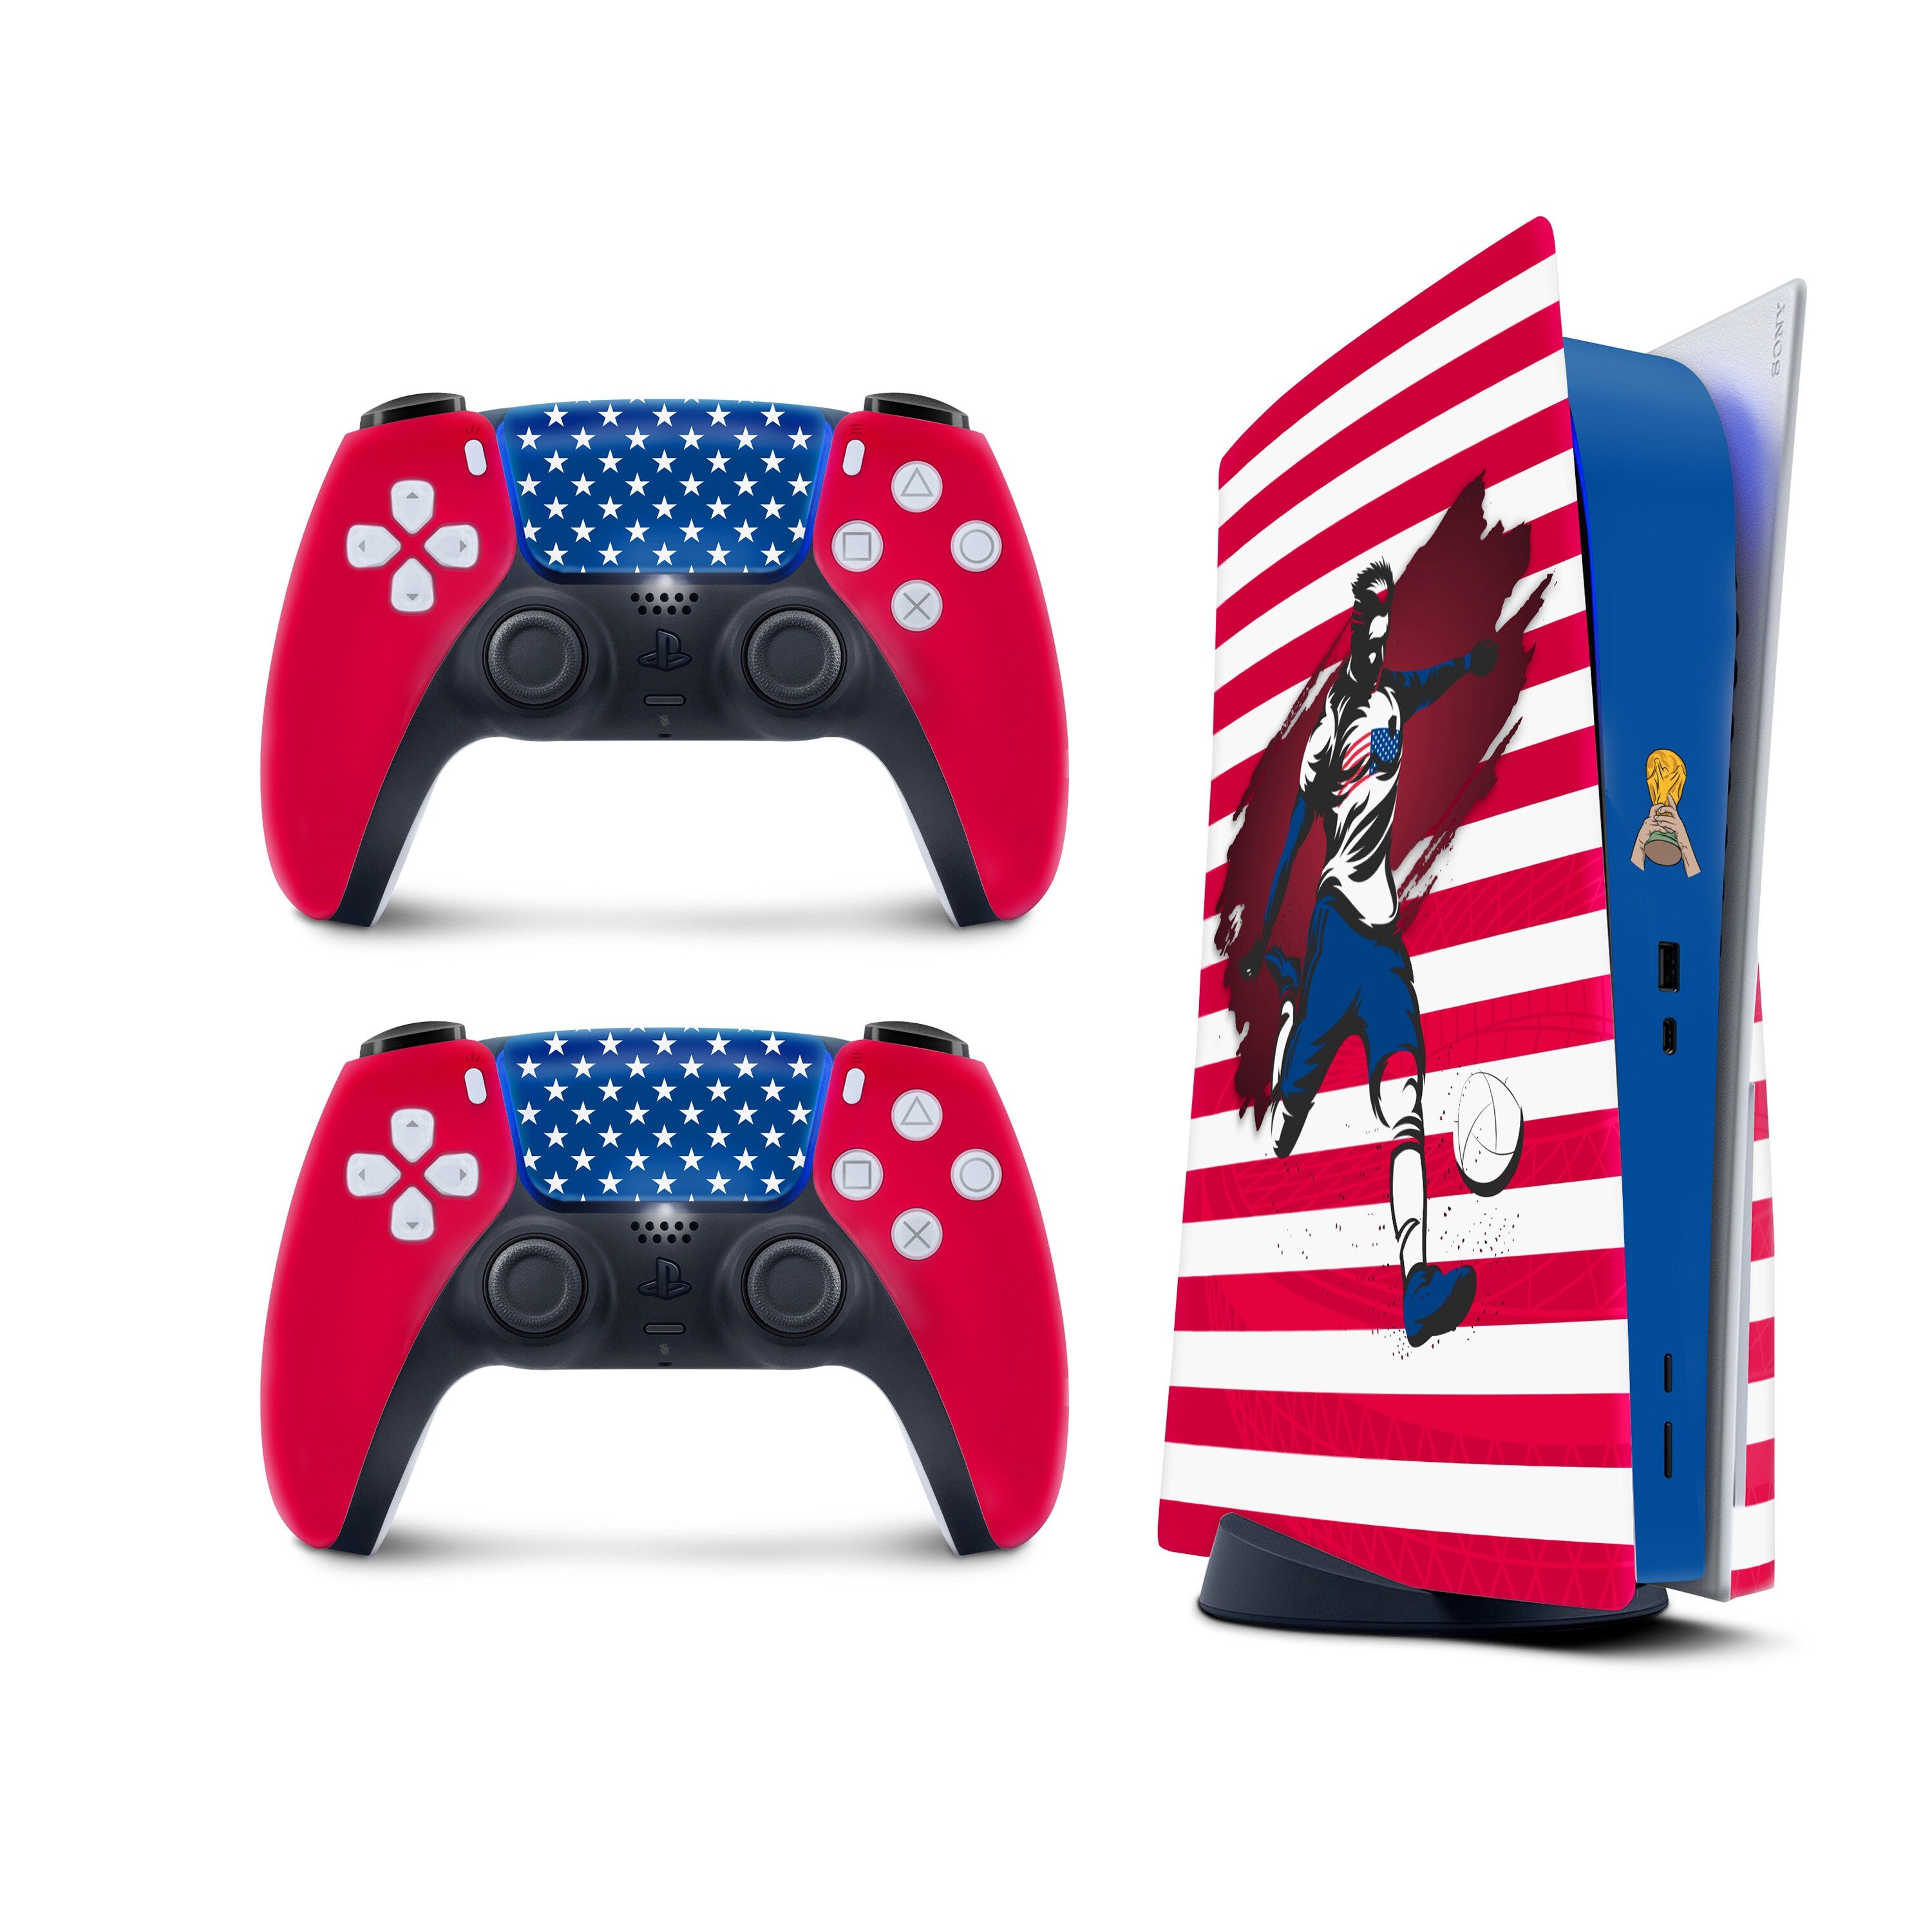 Ps5 skin World Cup Stickers 2022, National Teams Playstation 5 controller skin, Soccer Stickers Vinyl 3m stickers Full wrap cover